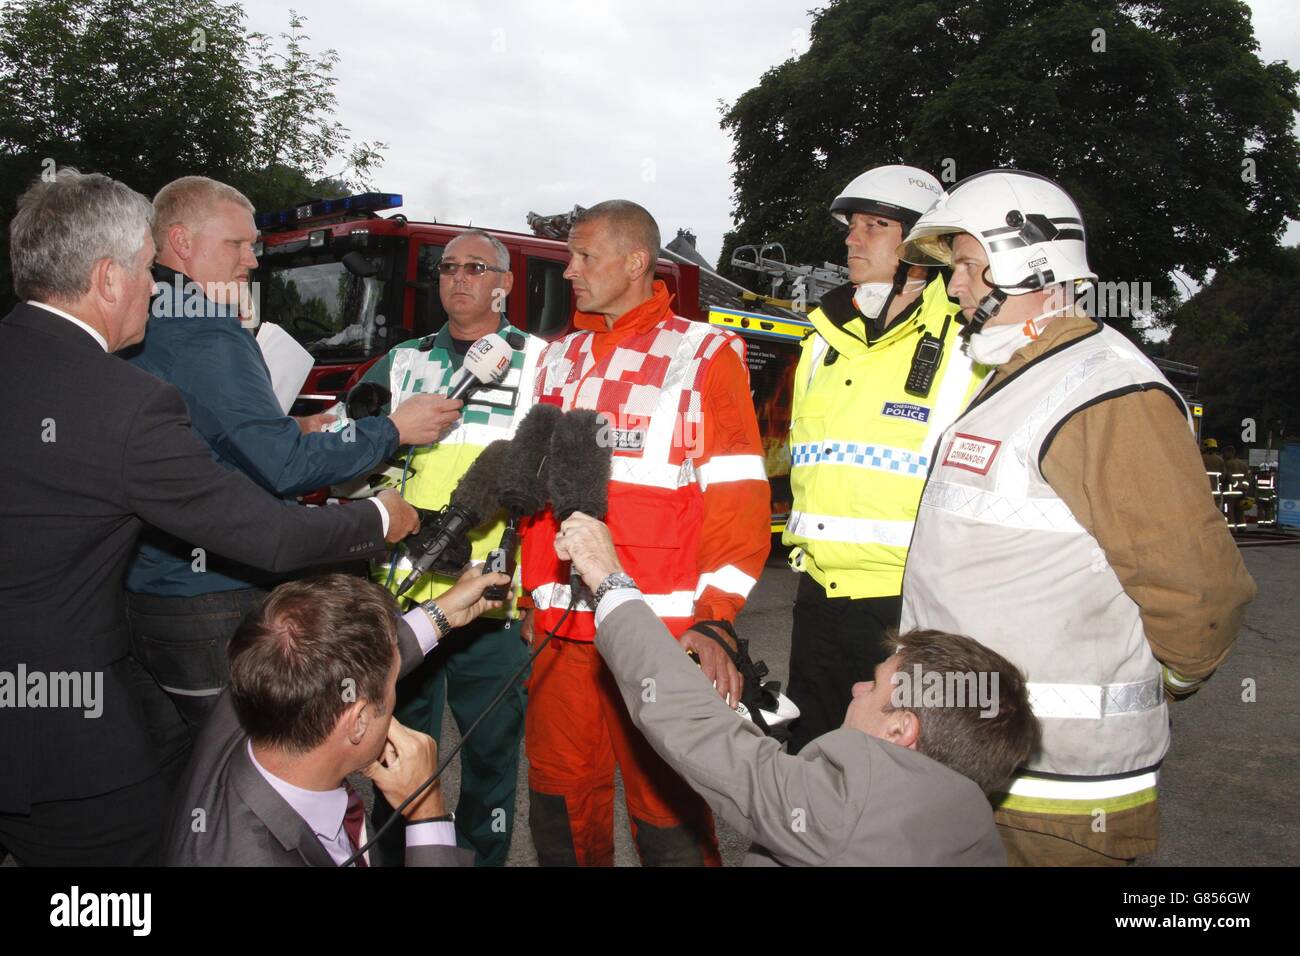 (Left - right) Ambulance Bronze Commander Steve Hallmark, Urban Search and Rescue Technical Advisor Paul Hitchen, Cheshire Constabulary Commander at the scene Peter Crowcroft and Cheshire Fire Service incident commander Andy Royle speak to the media at the scene of the huge explosion at Wood Treatment Limited plant in the village of Bosley, Cheshire. Stock Photo